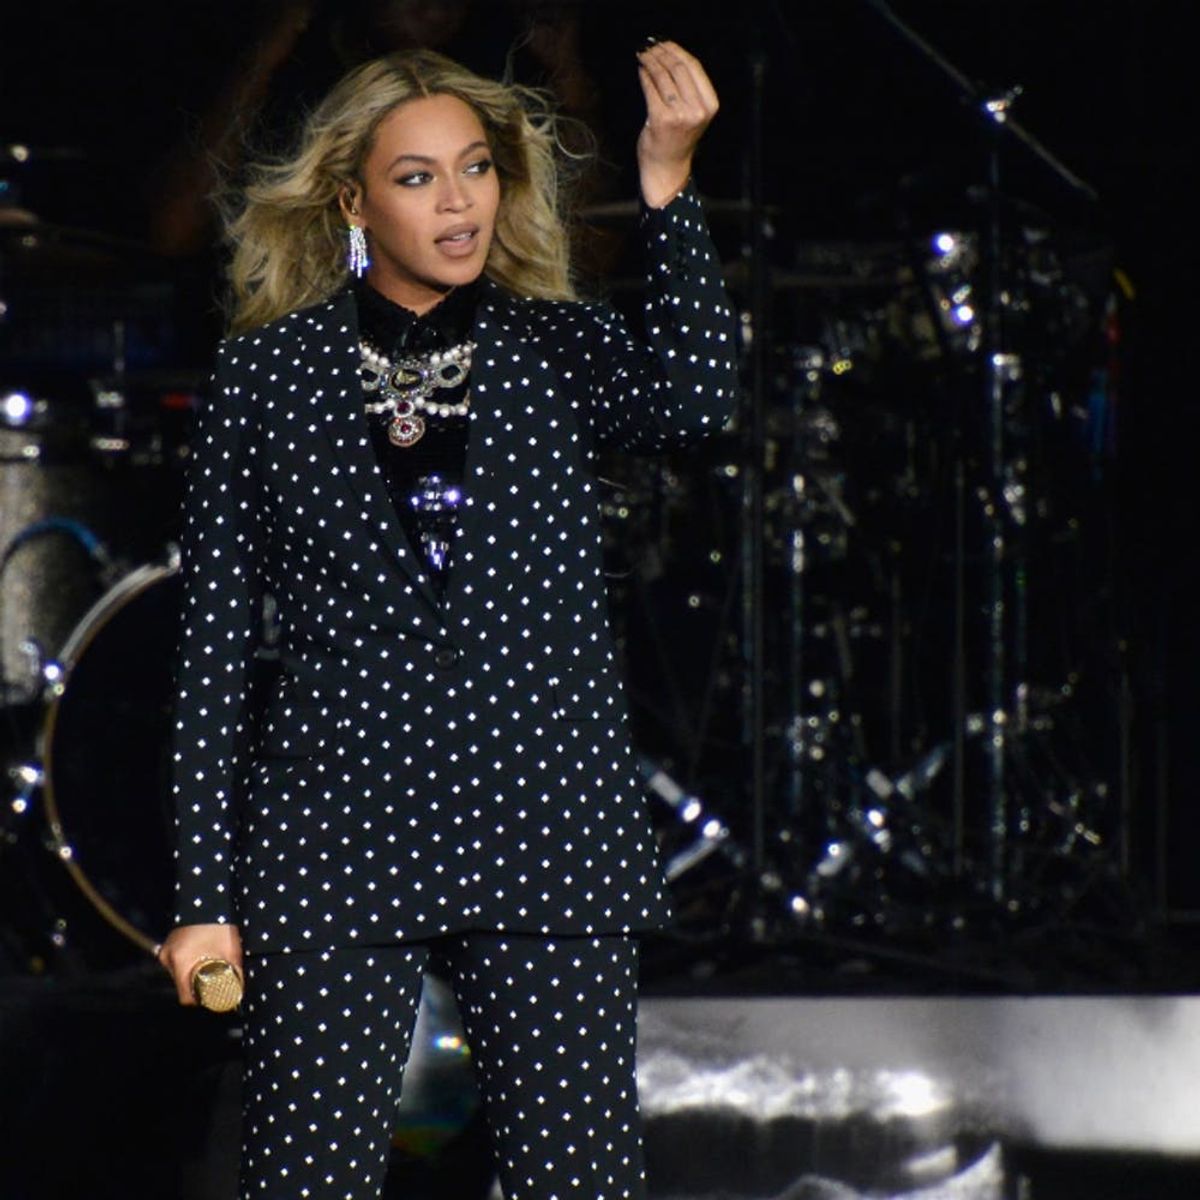 Beyoncé Is Facing a Copyright Lawsuit Over Formation, and the Details Are Super Shady